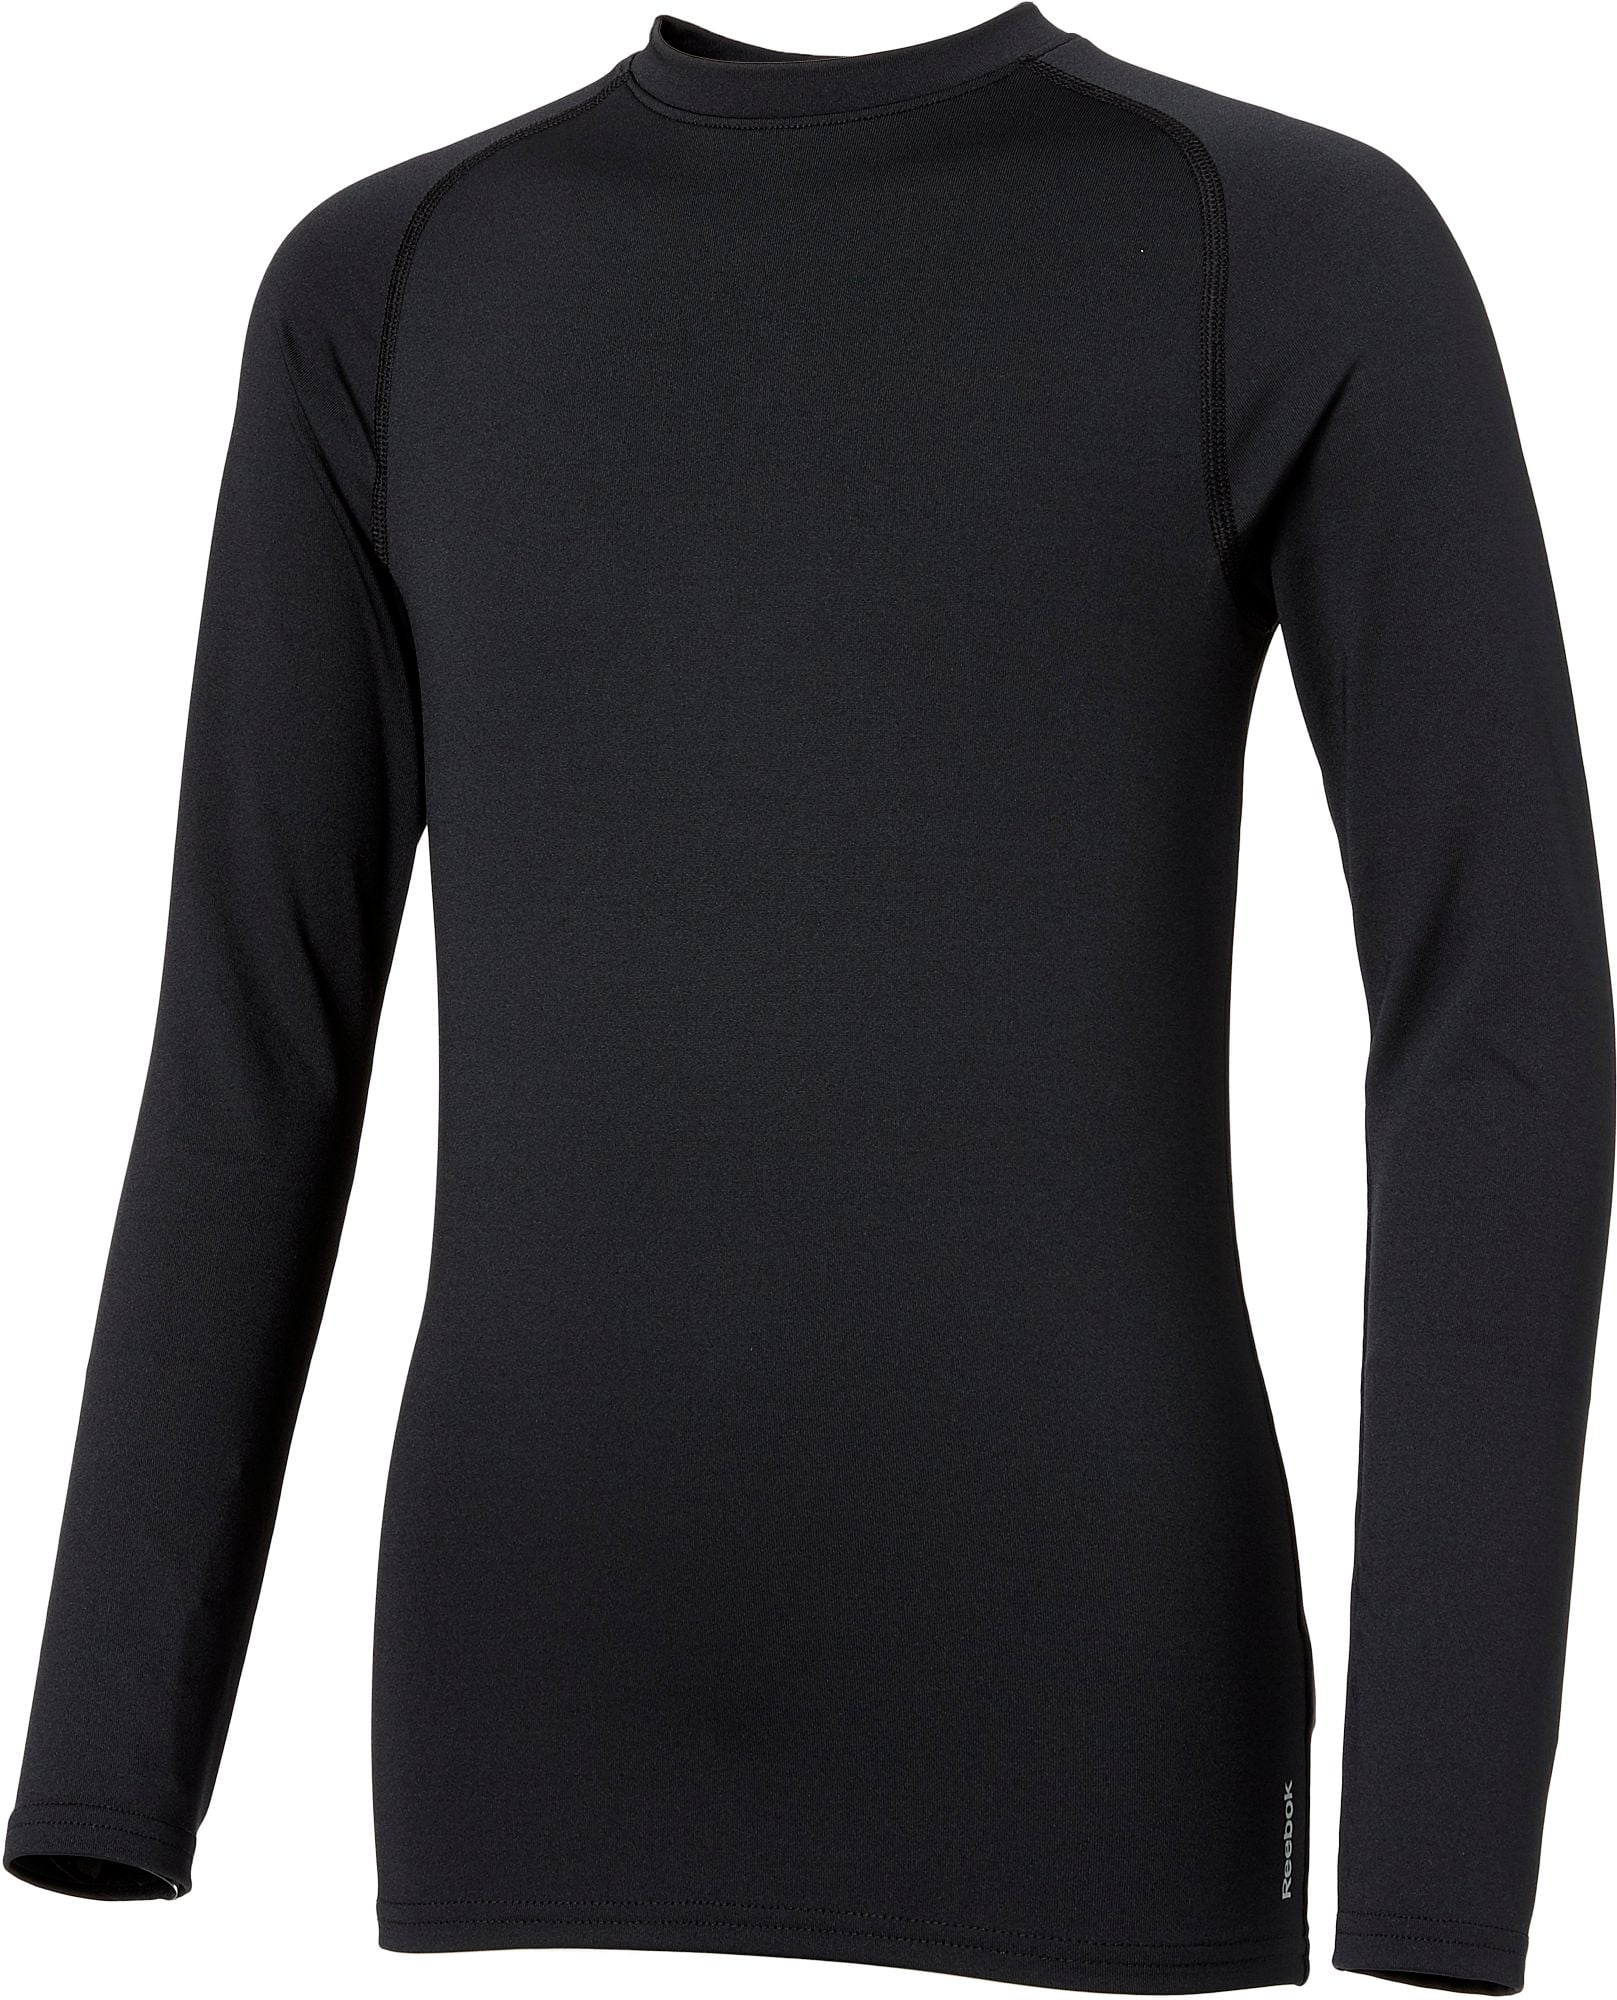 reebok men's cold weather compression crew neck long sleeve shirt